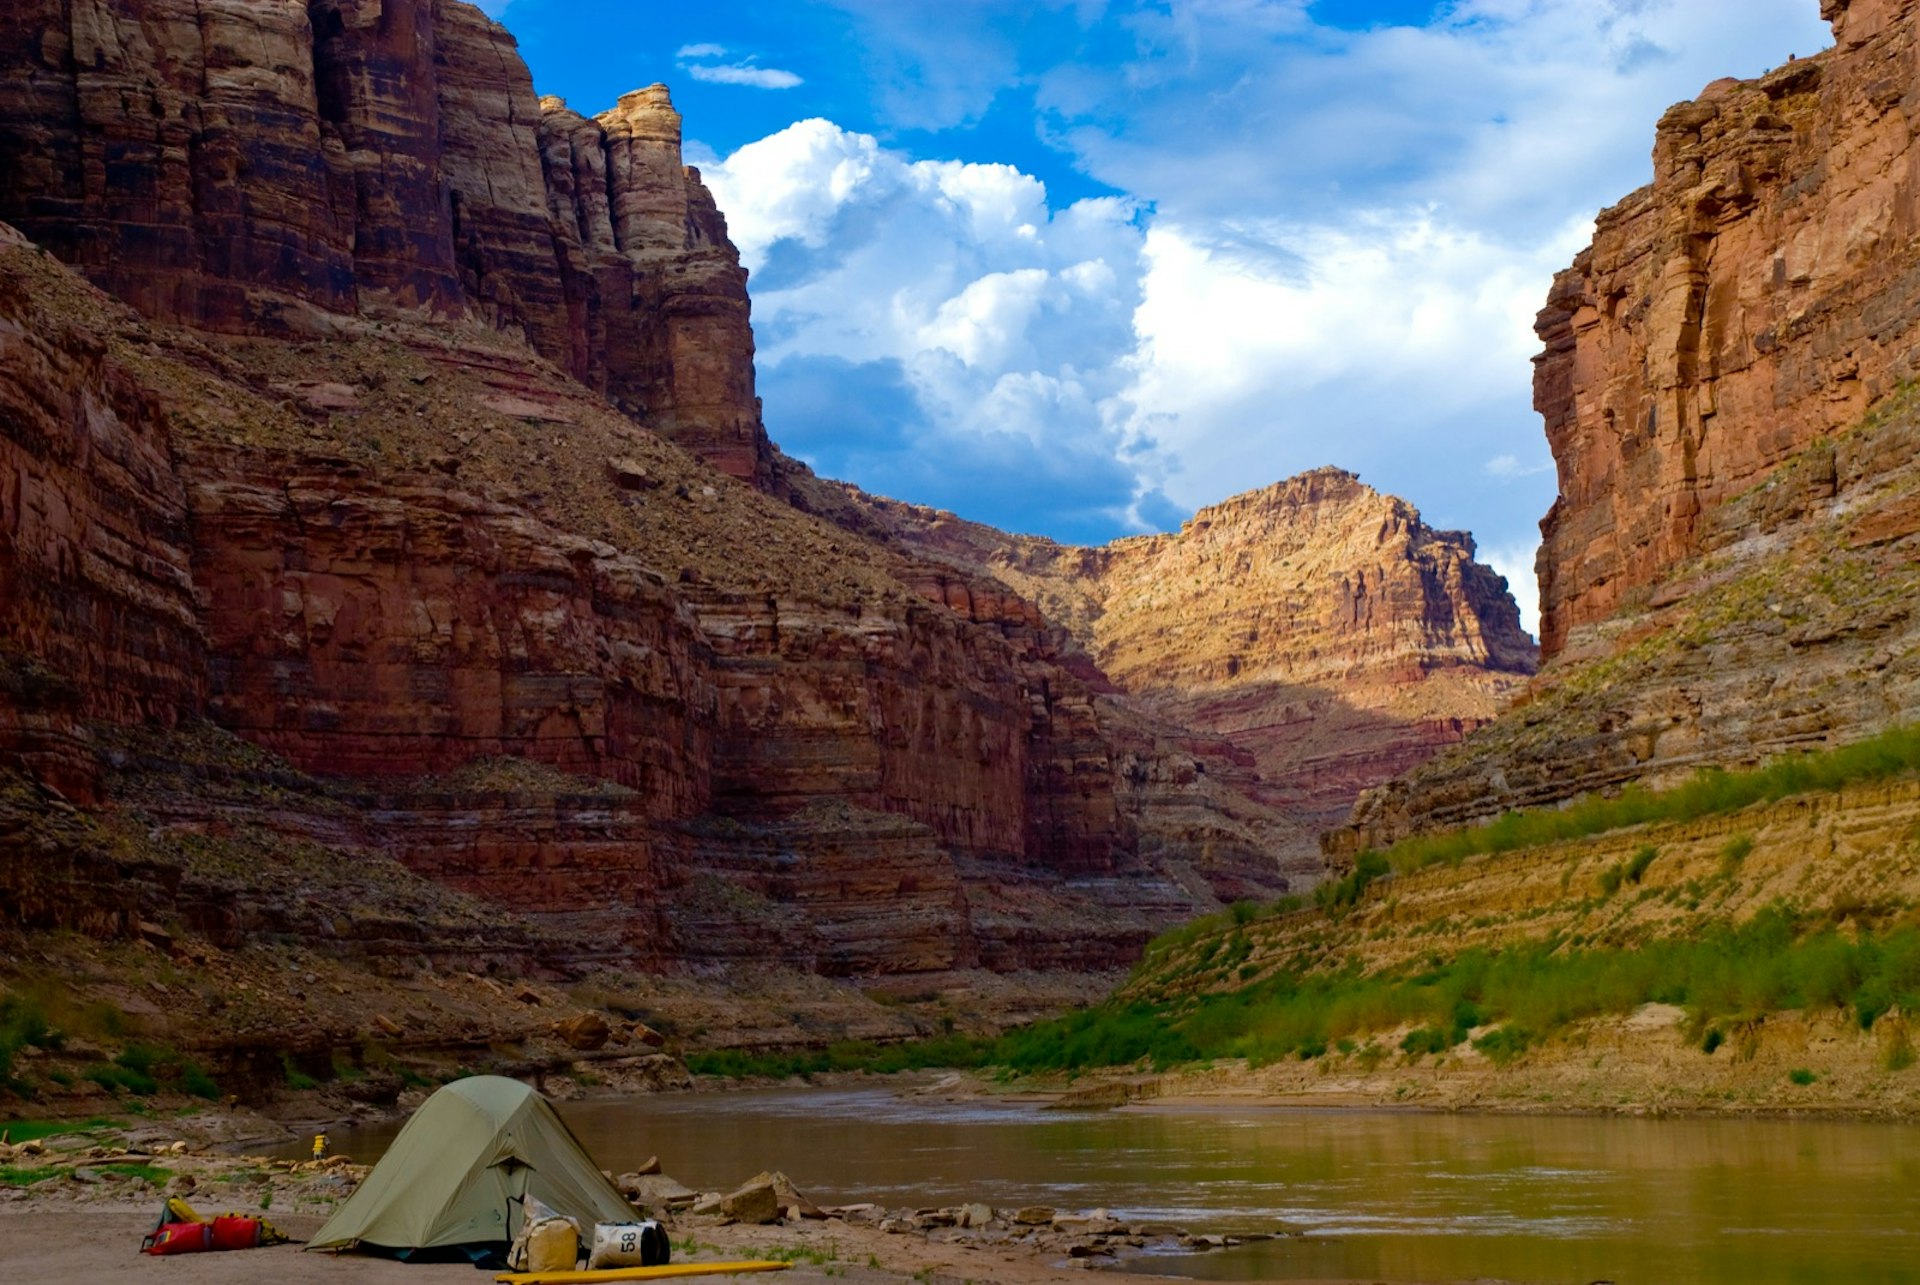 Campsite with tent and gear in Cataract Canyon on the Colorado River in Utah.